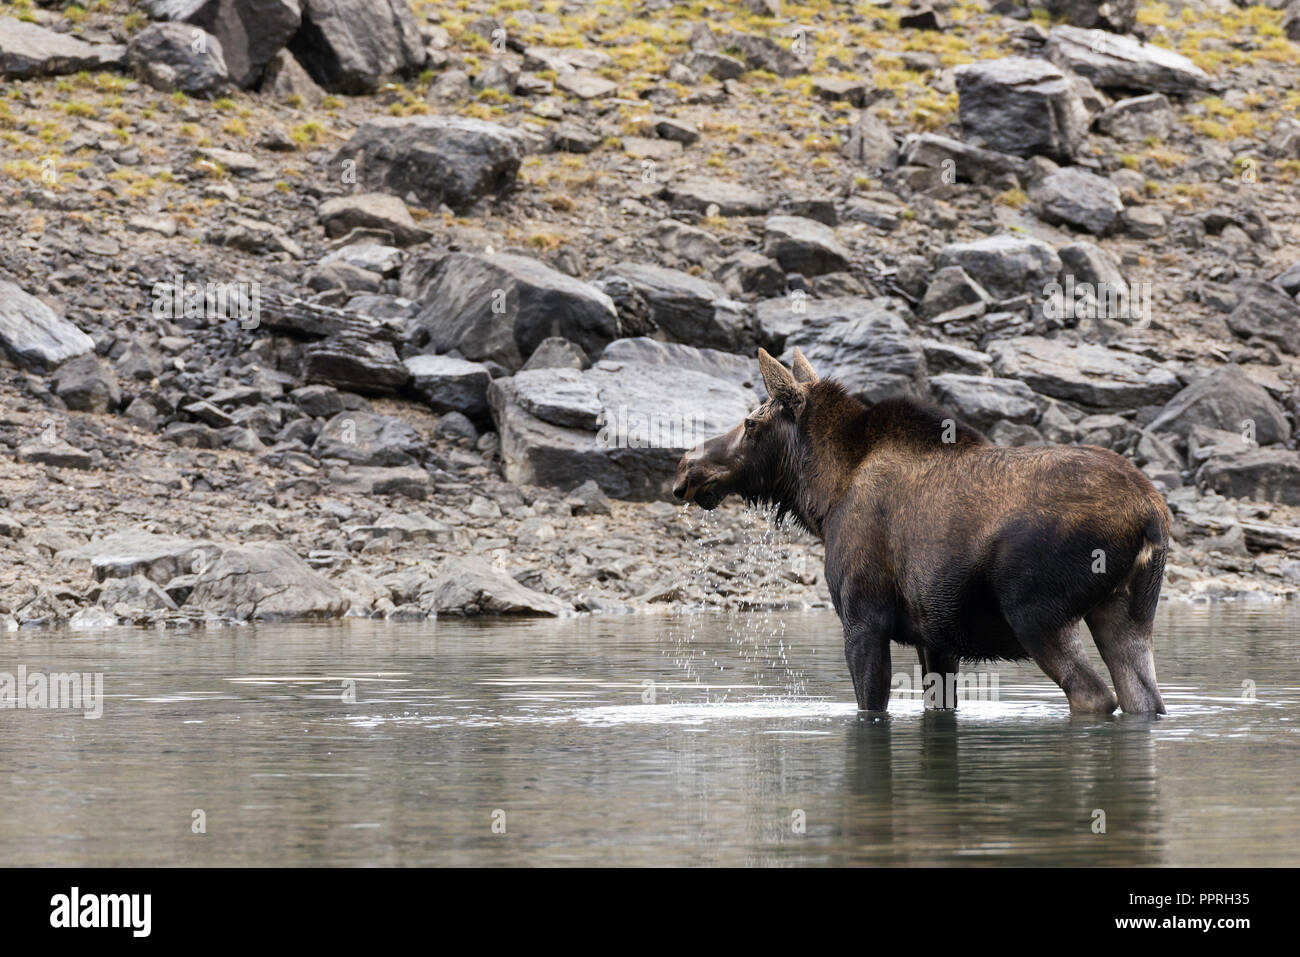 A large feamle moose eating in the waters of a lake Stock Photo